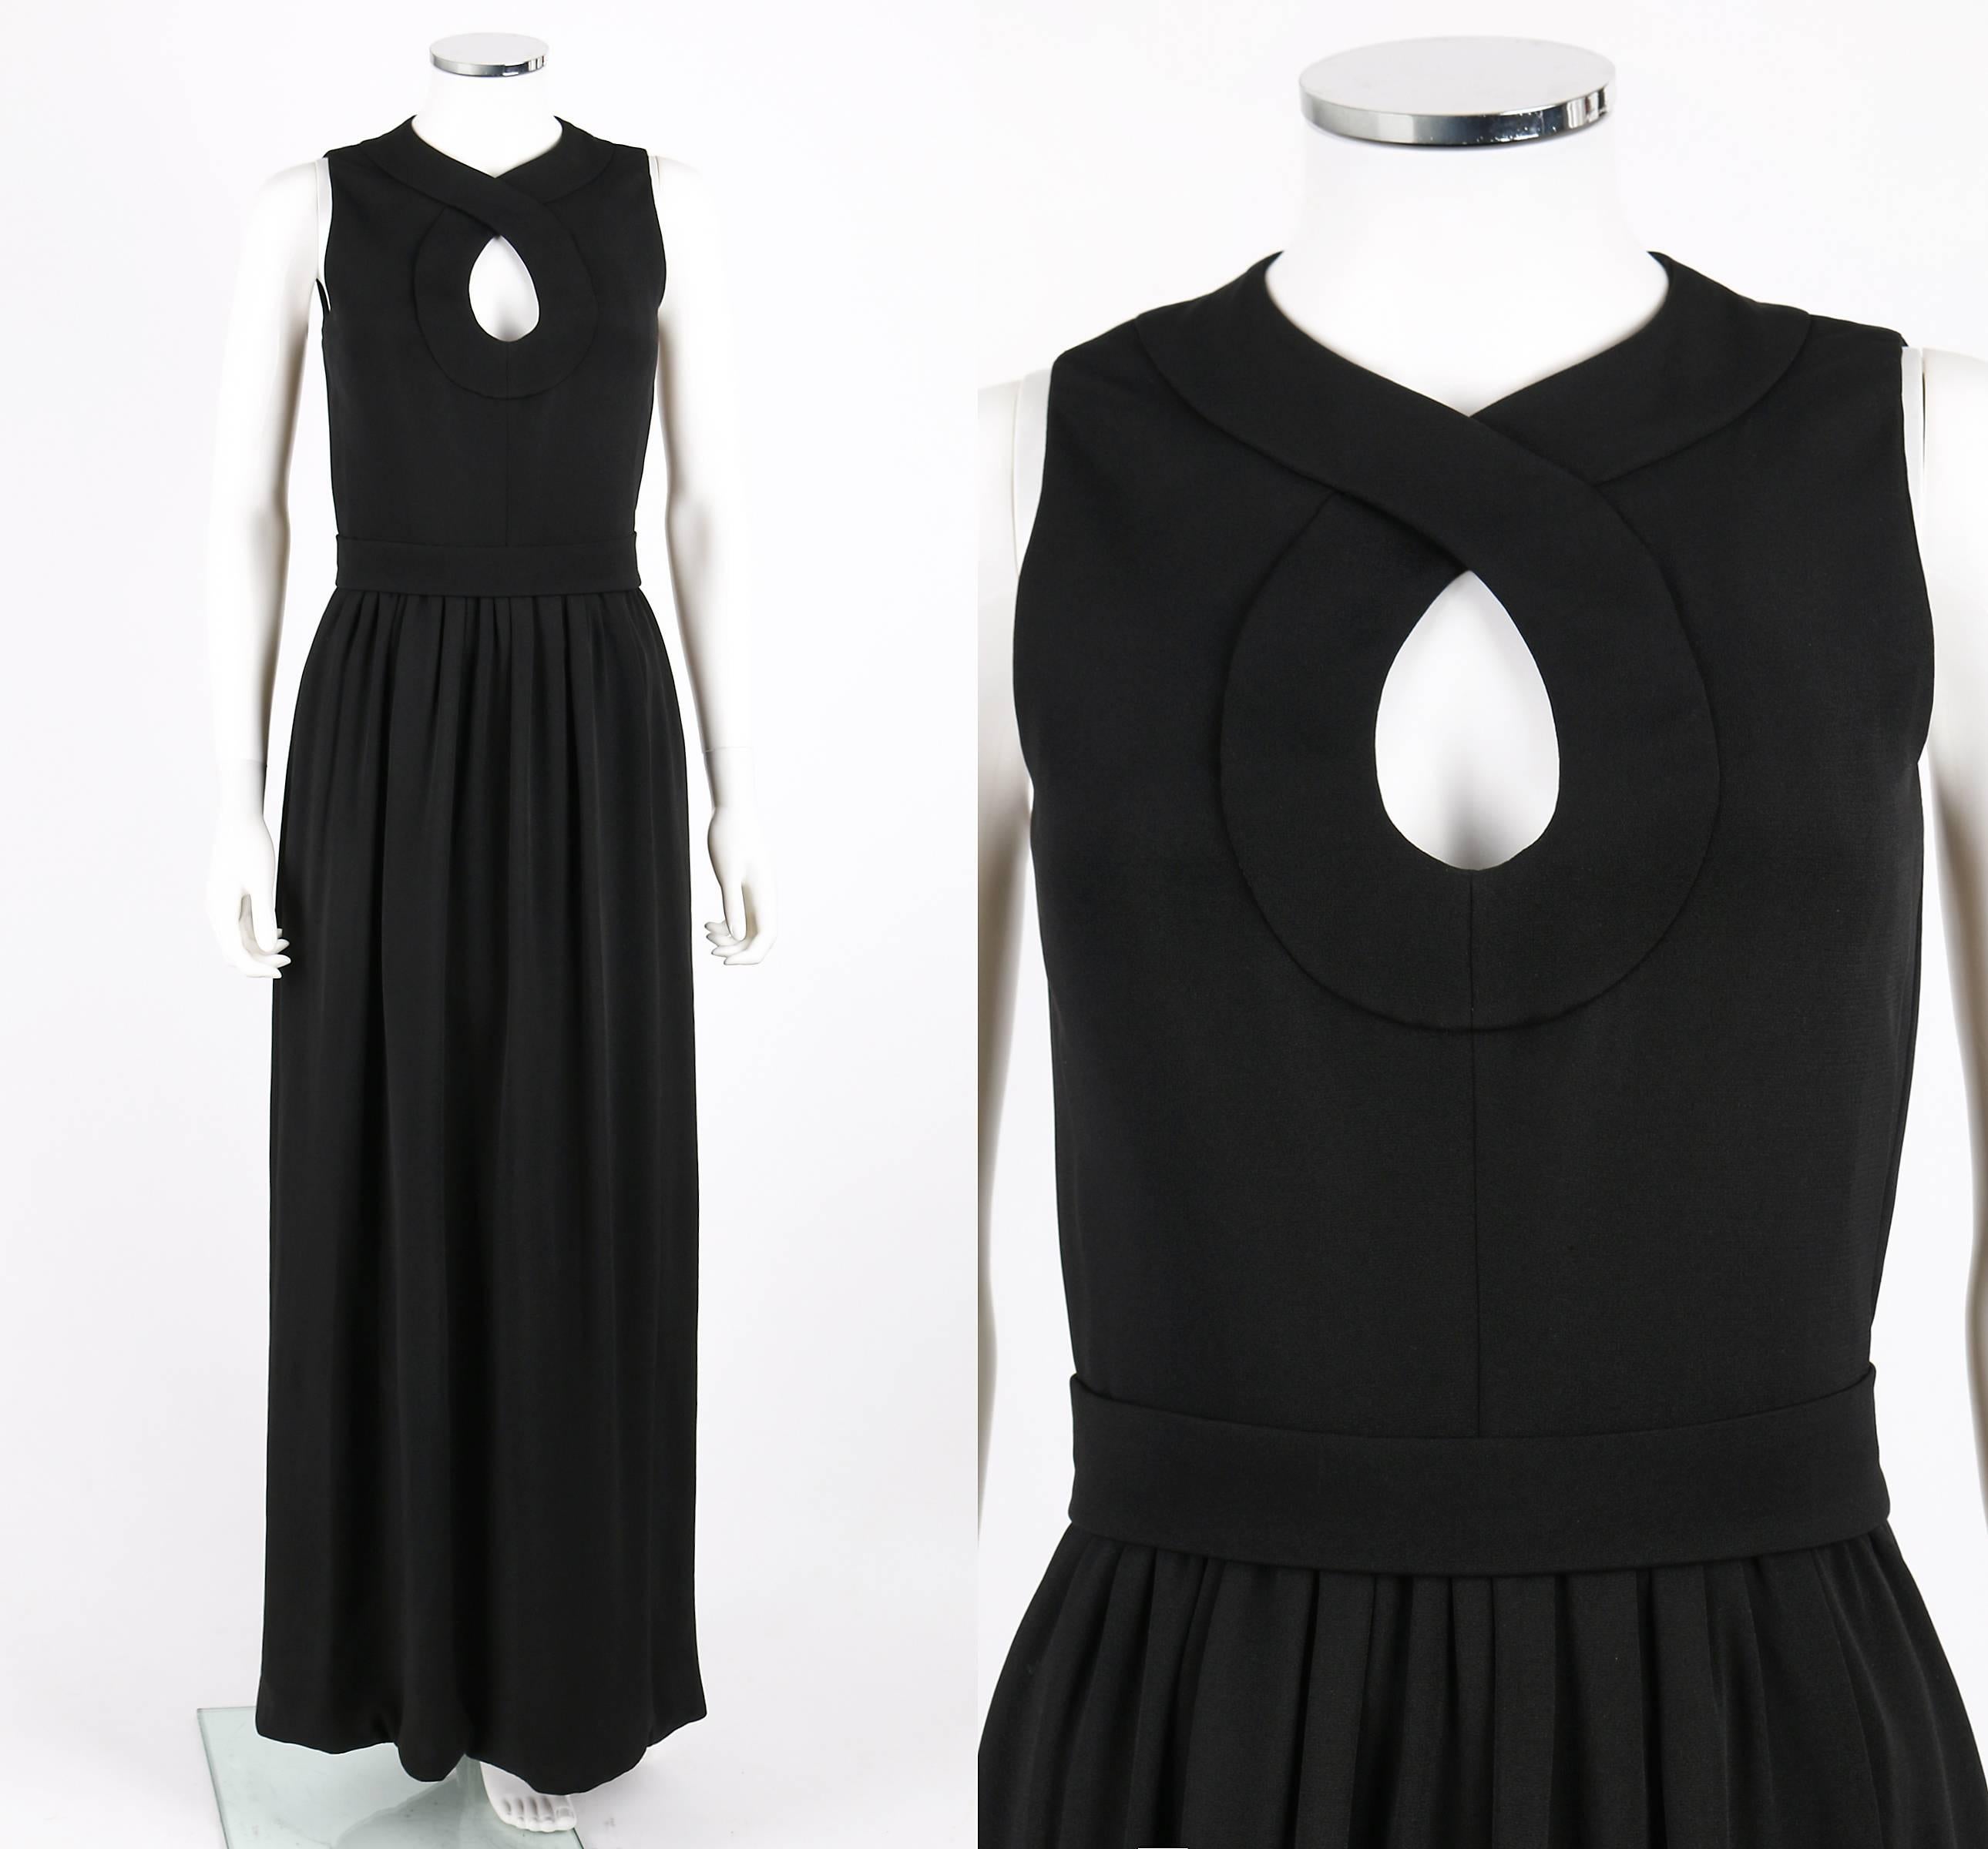 Vintage c.1960's Donald Brooks black wool sleeveless evening gown. Keyhole neckline with wide trim detail. Long gathered skirt. Center back invisible zipper with three covered button and loop closures and single snap closure at top. Matching